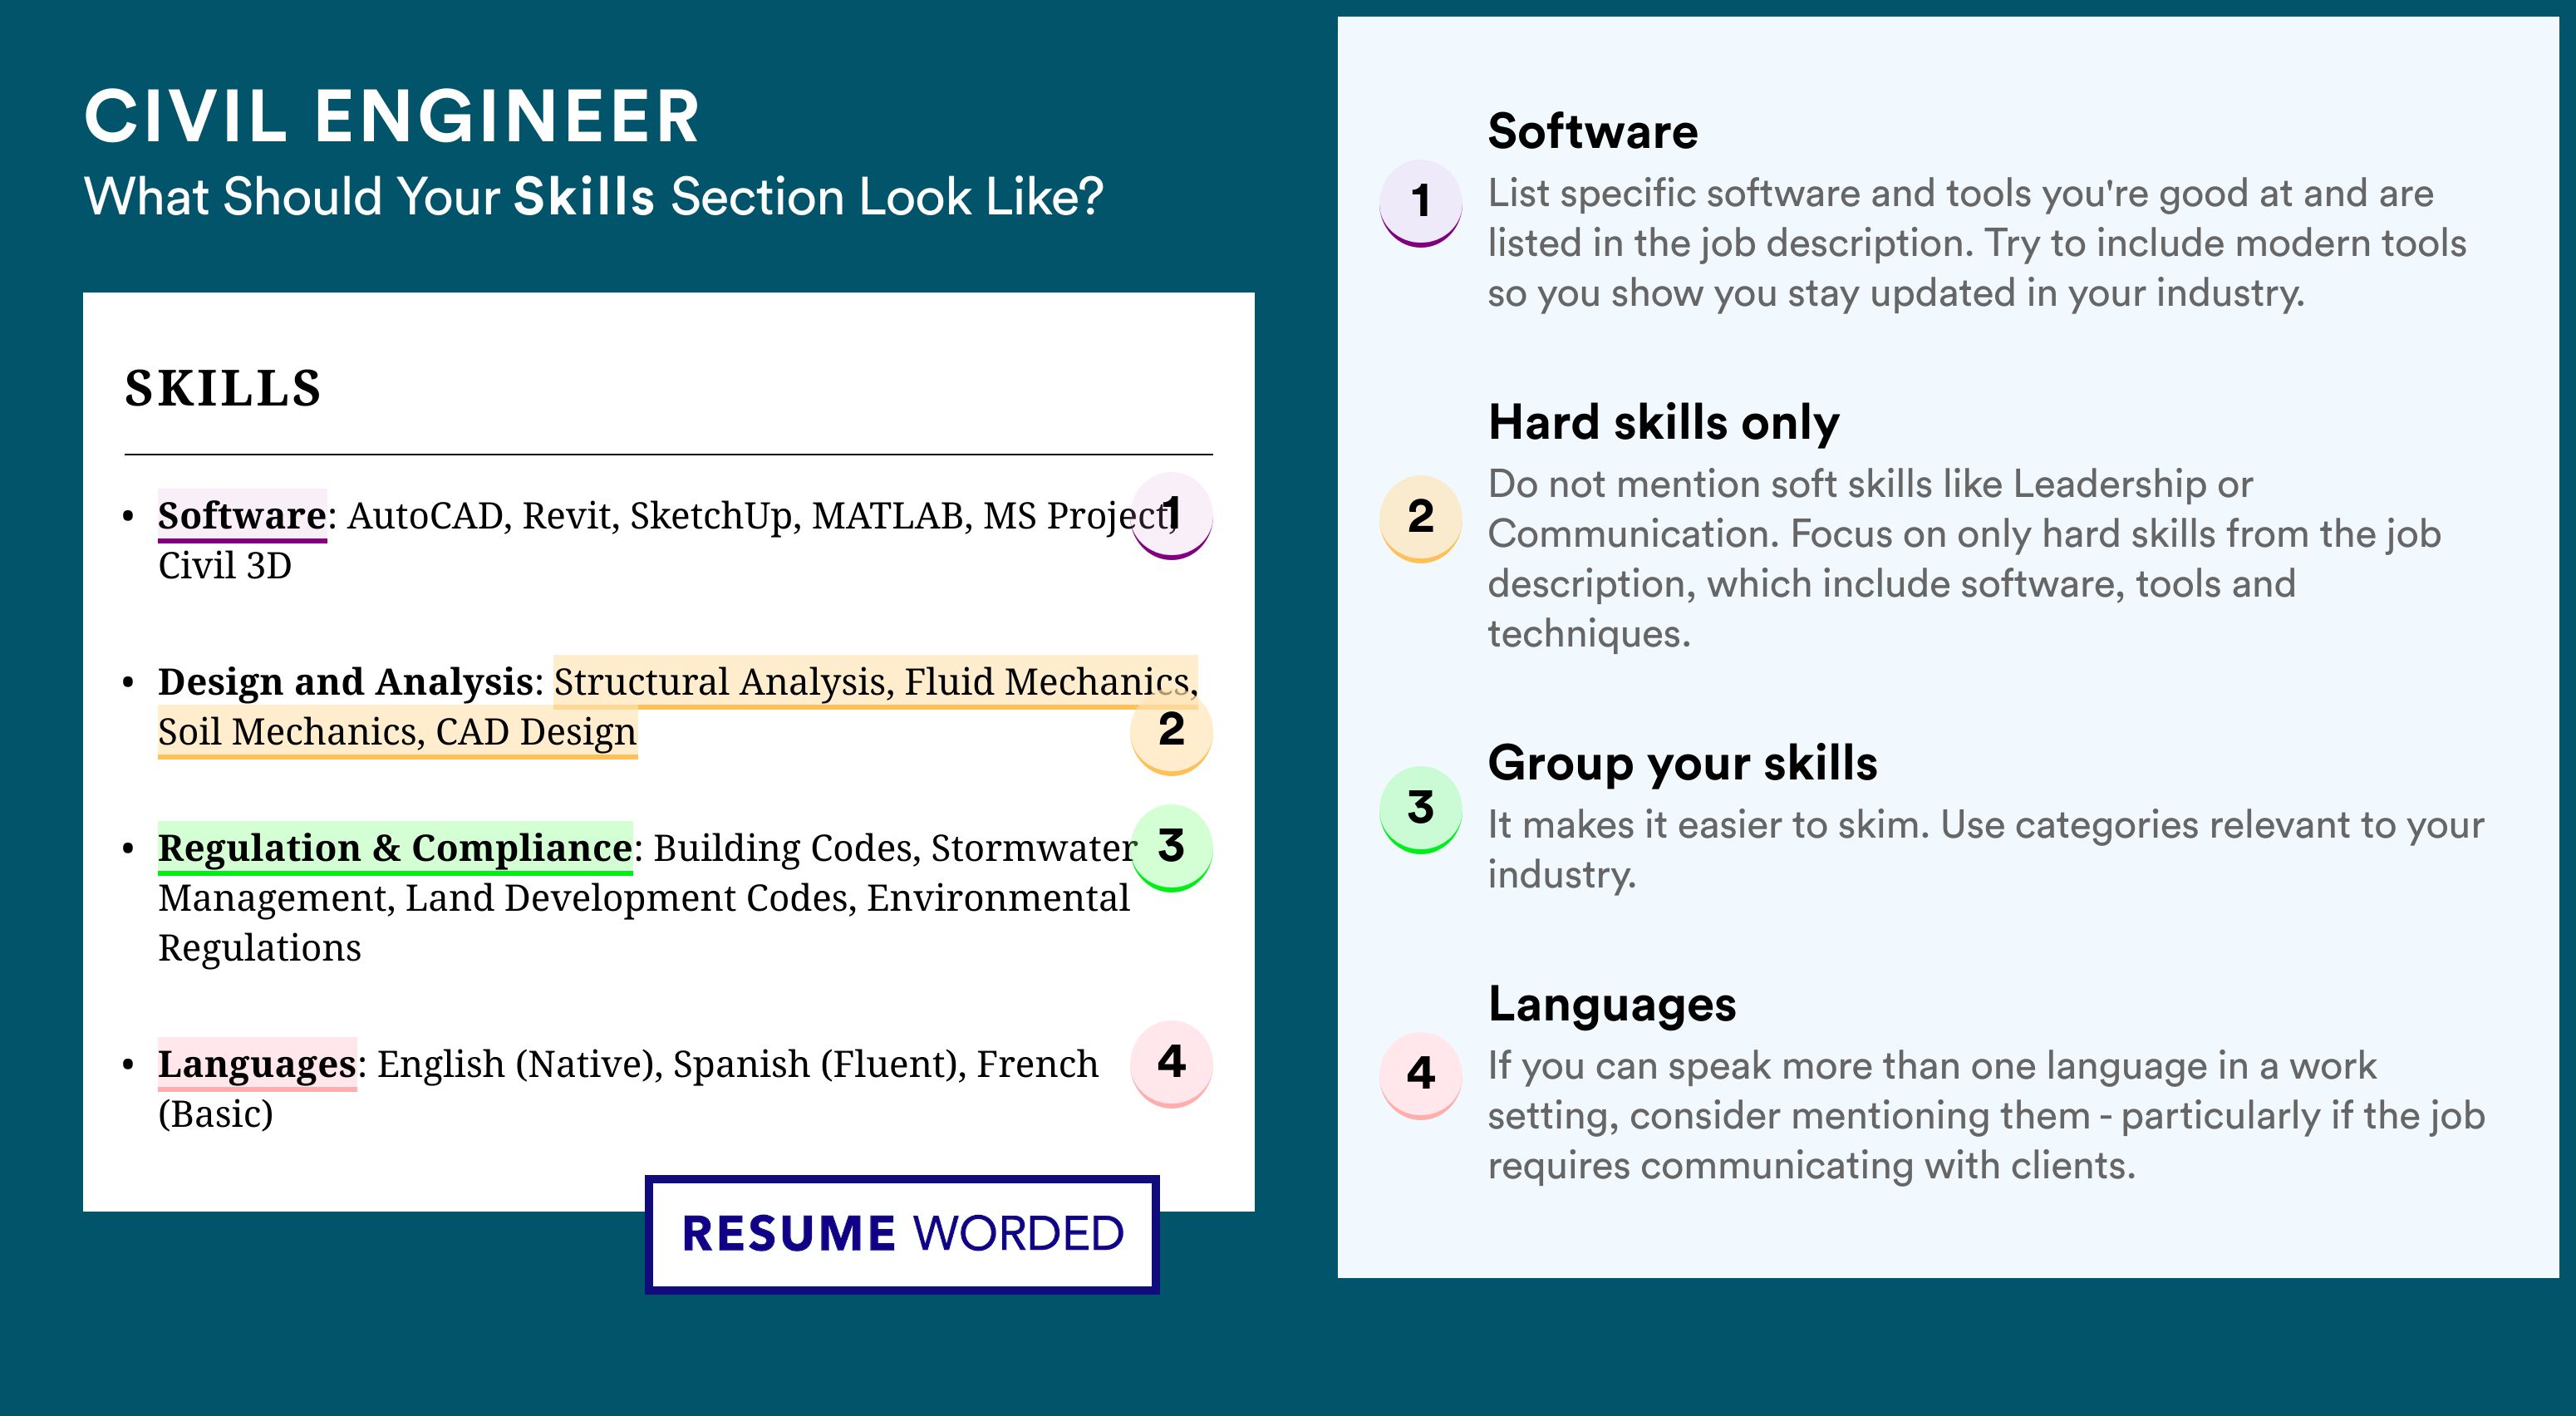 How To Write Your Skills Section - Civil Engineer Roles